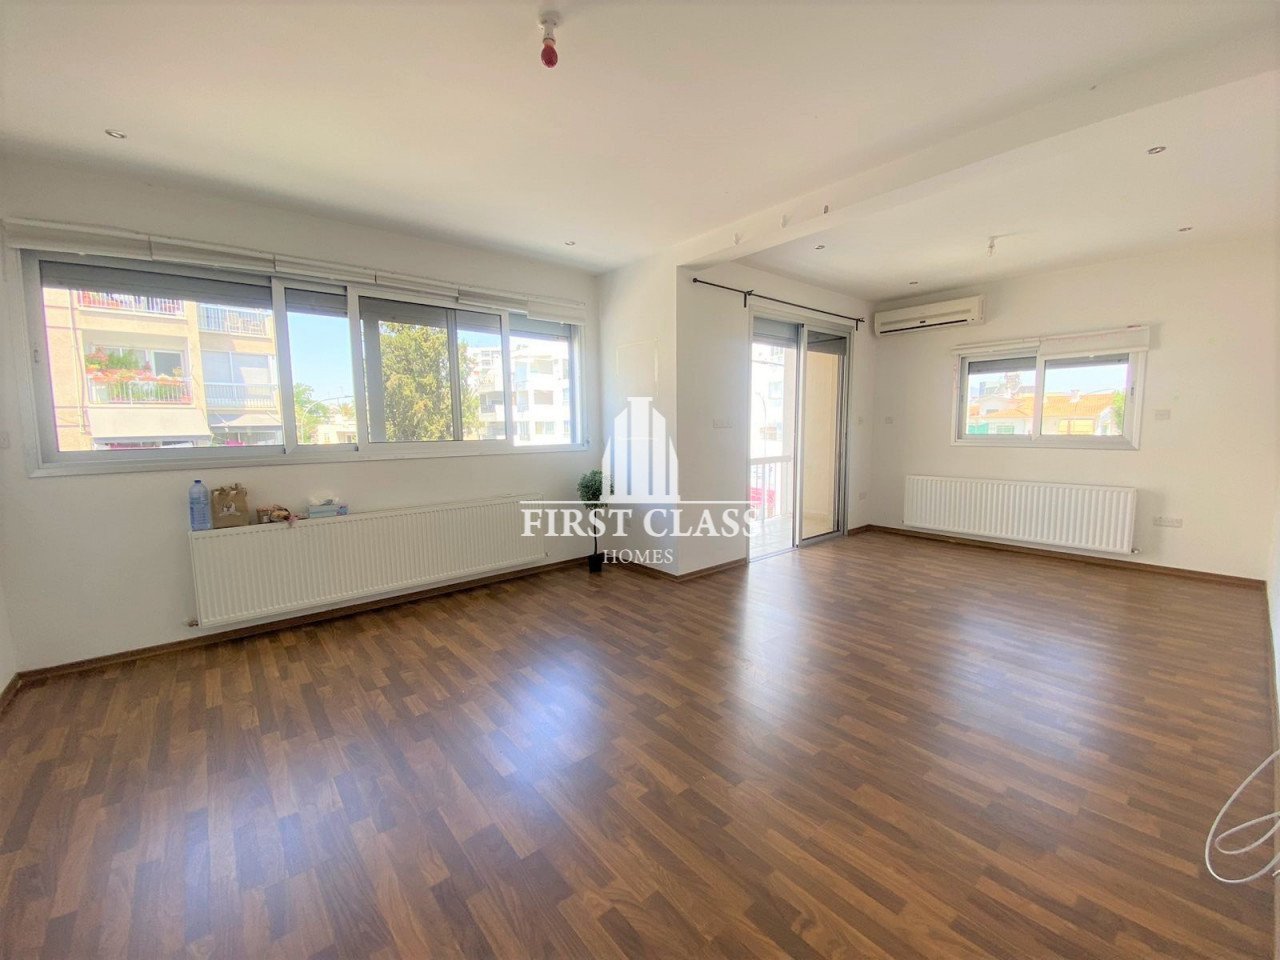 Property for Rent: Commercial (Office) in Engomi, Nicosia for Rent | Key Realtor Cyprus